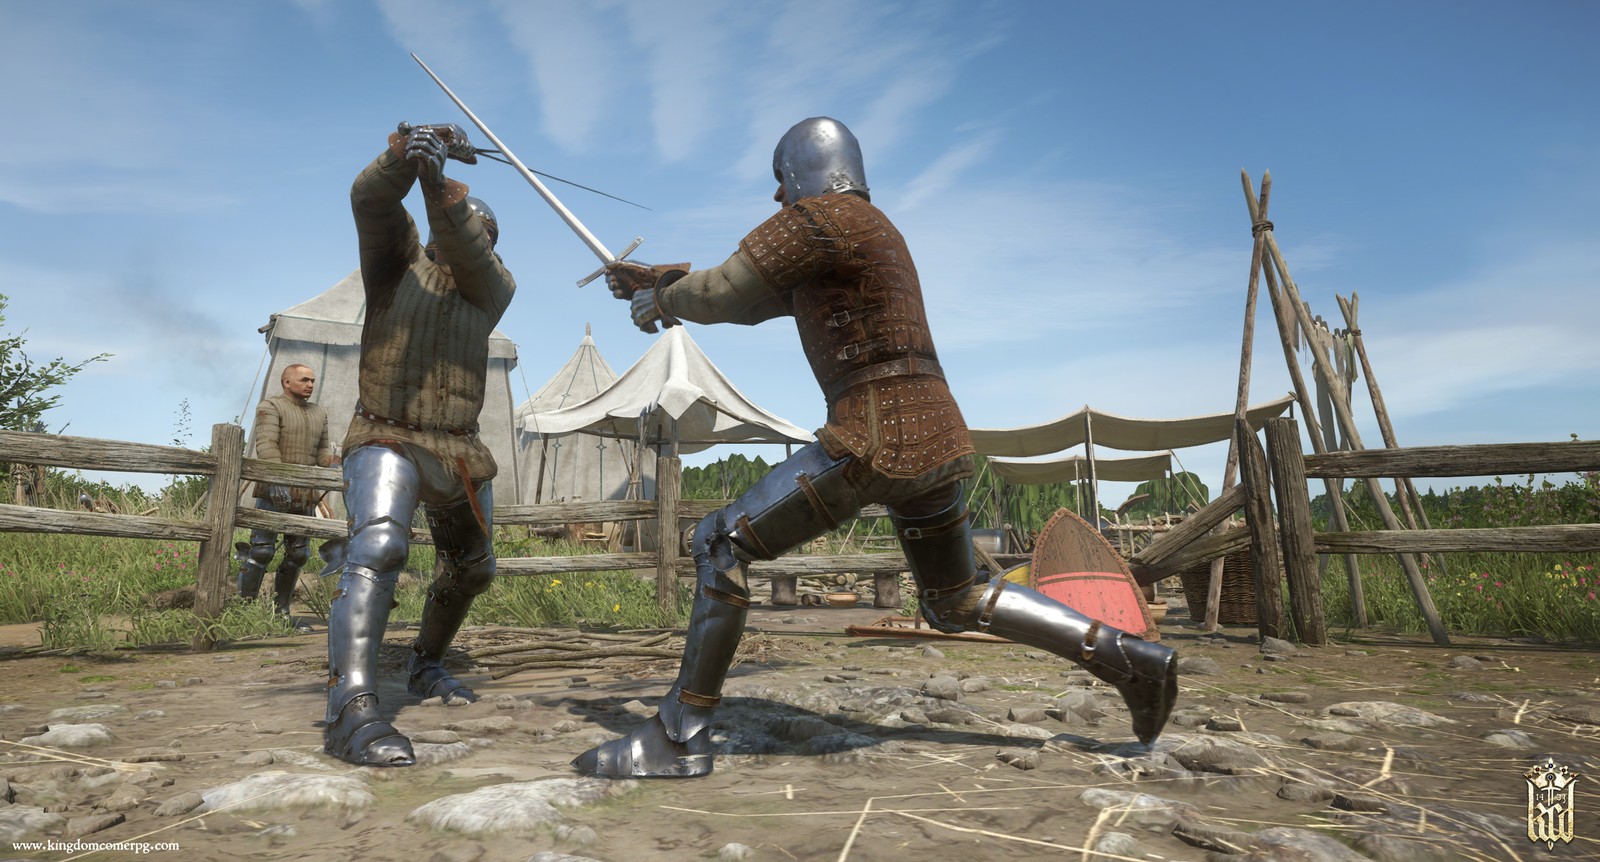 Kingdom Come: Deliverance Introduces Modding Tools For Gamers To Craft New Content